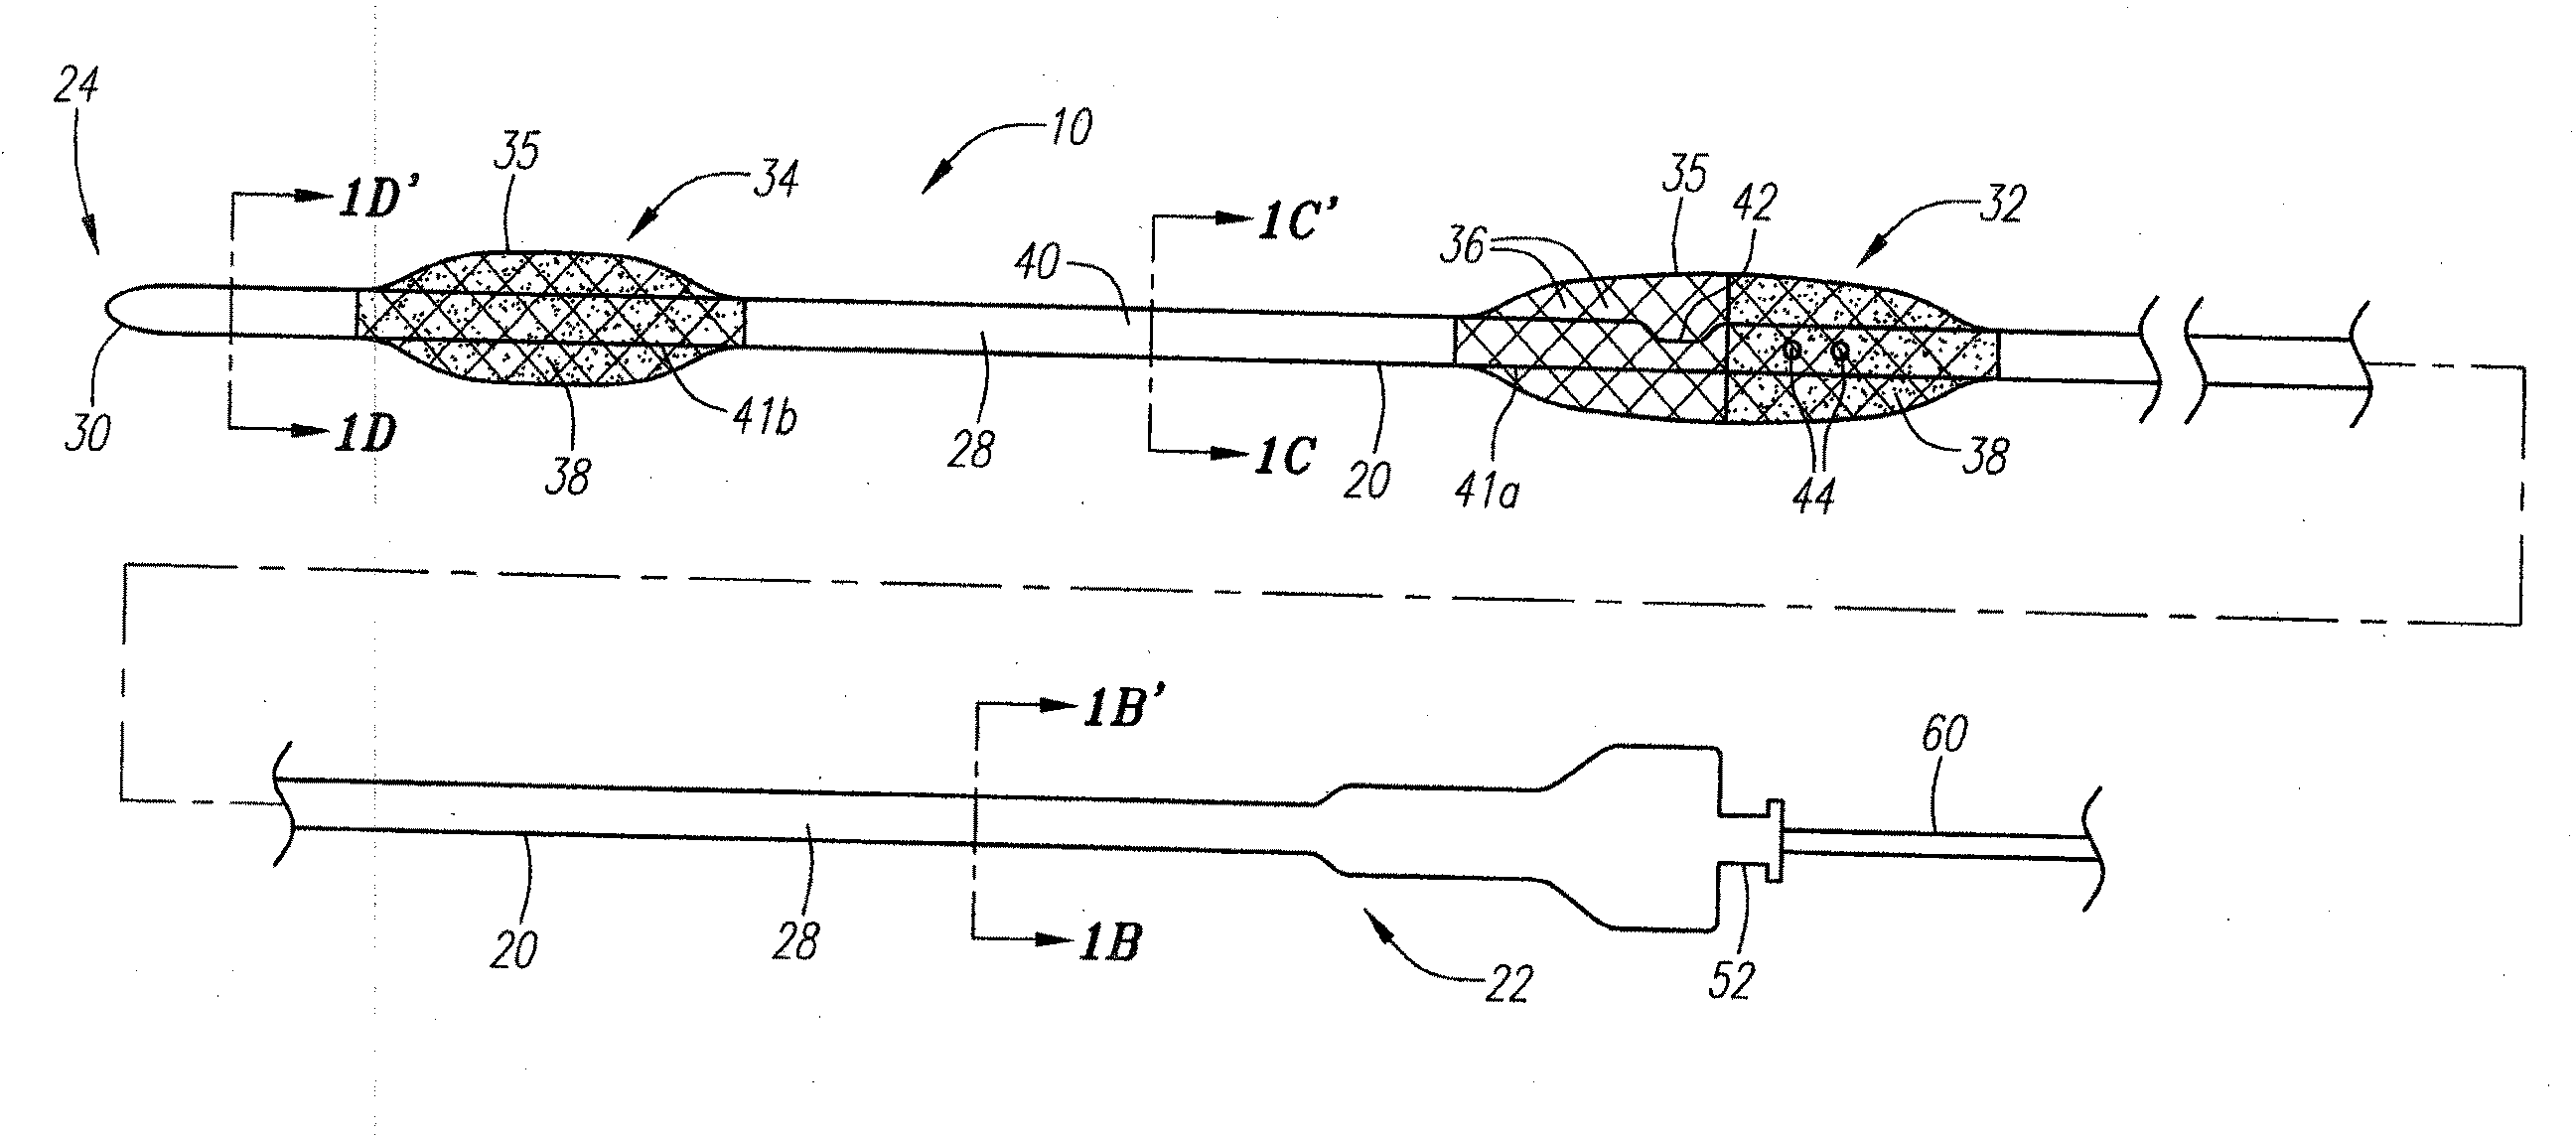 Occlusion device and method of use